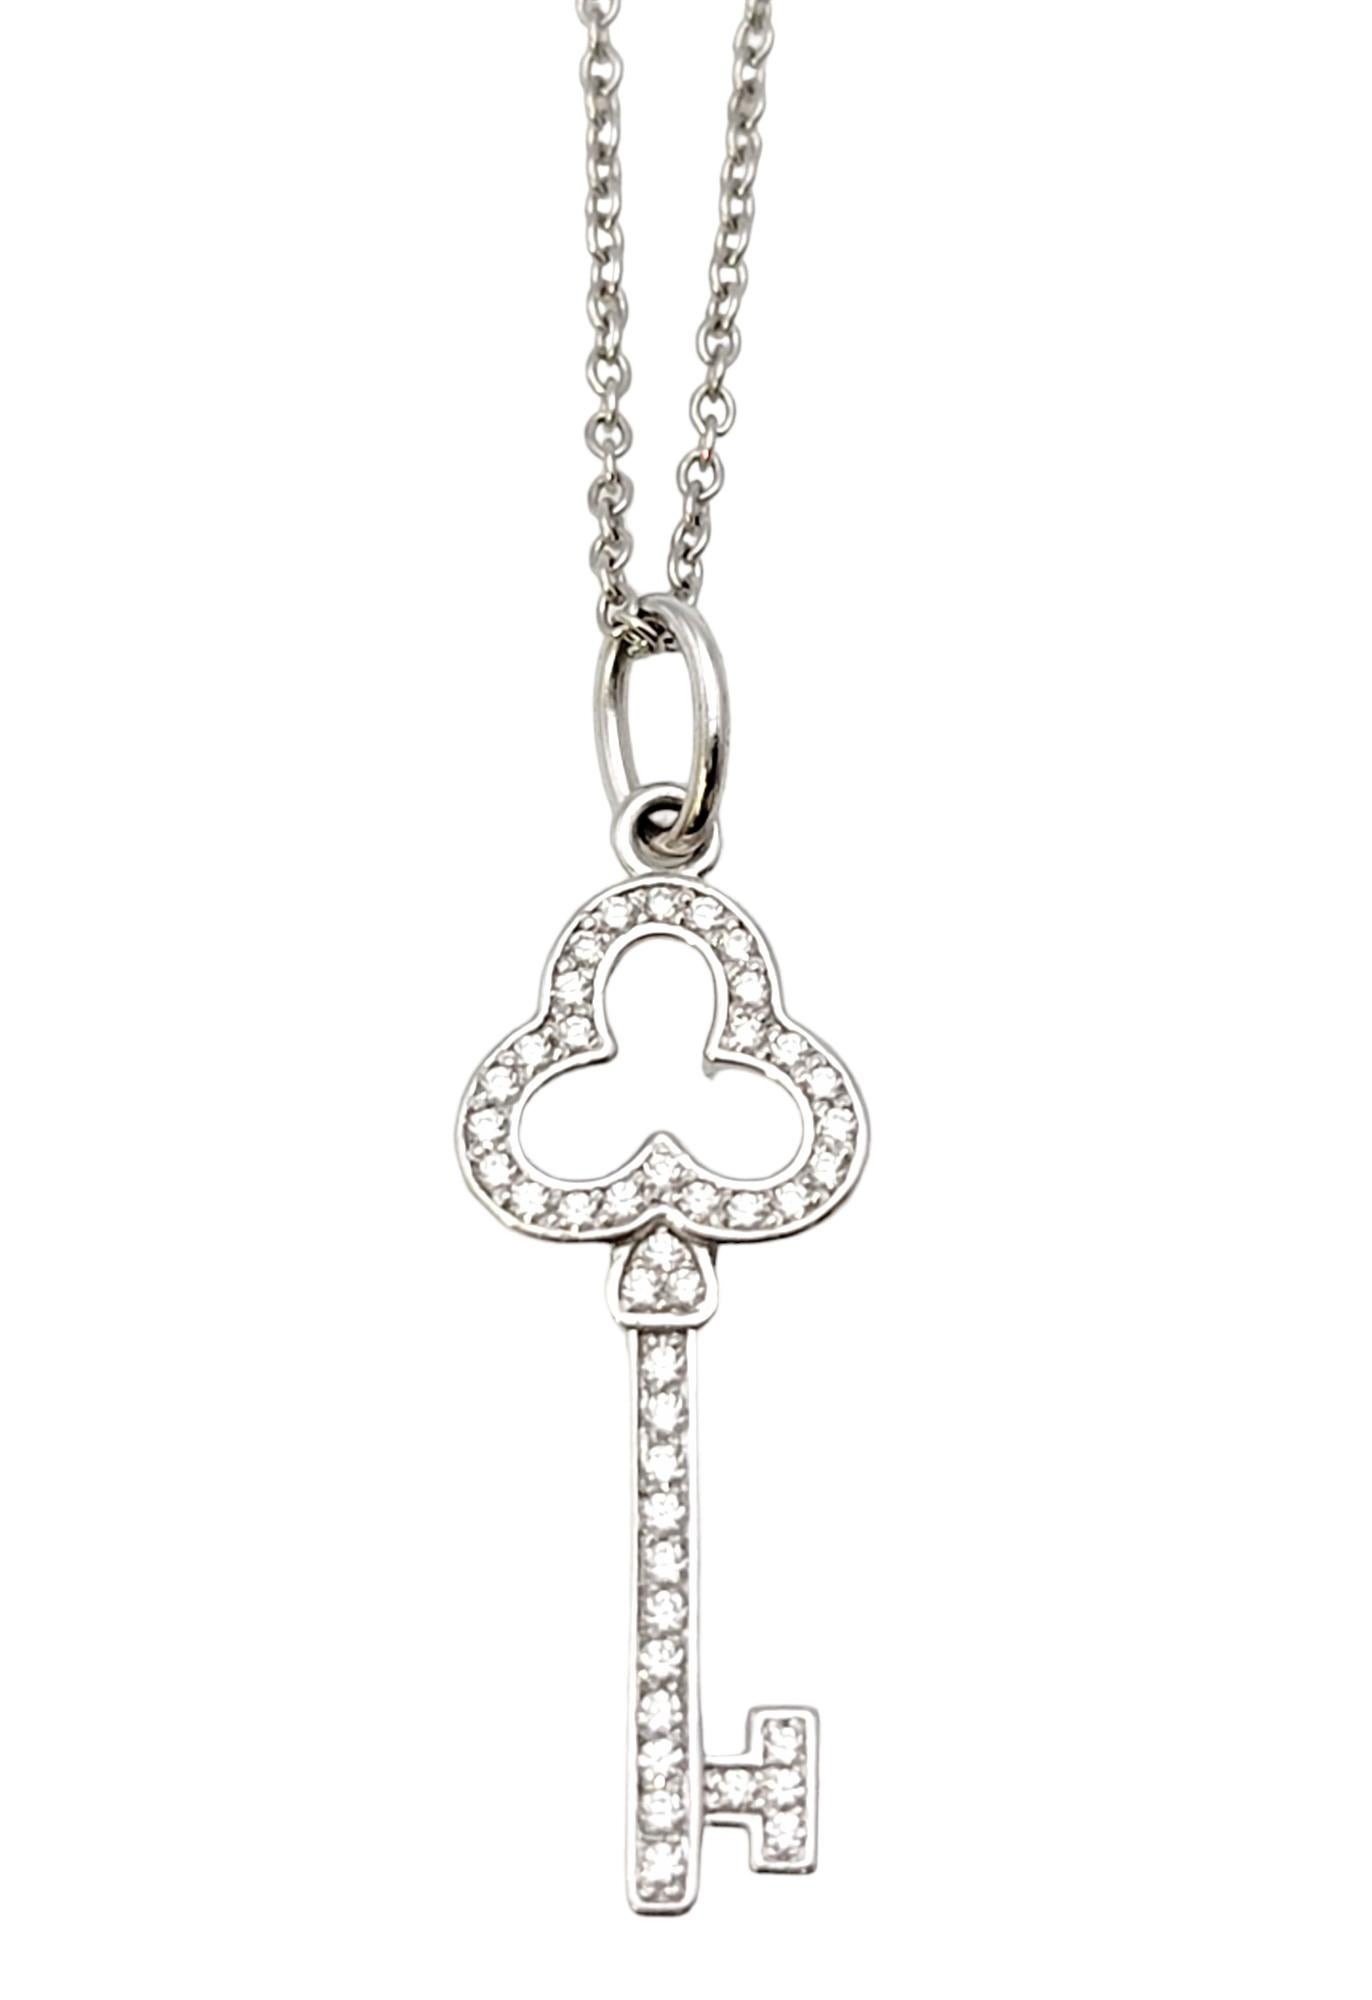 This chic pendant necklace from Tiffany & Co. is the epitome of understated elegance. Founded in 1837 in New York City, Tiffany & Co. is one of the world's most storied luxury design houses recognized globally for its innovative jewelry design,